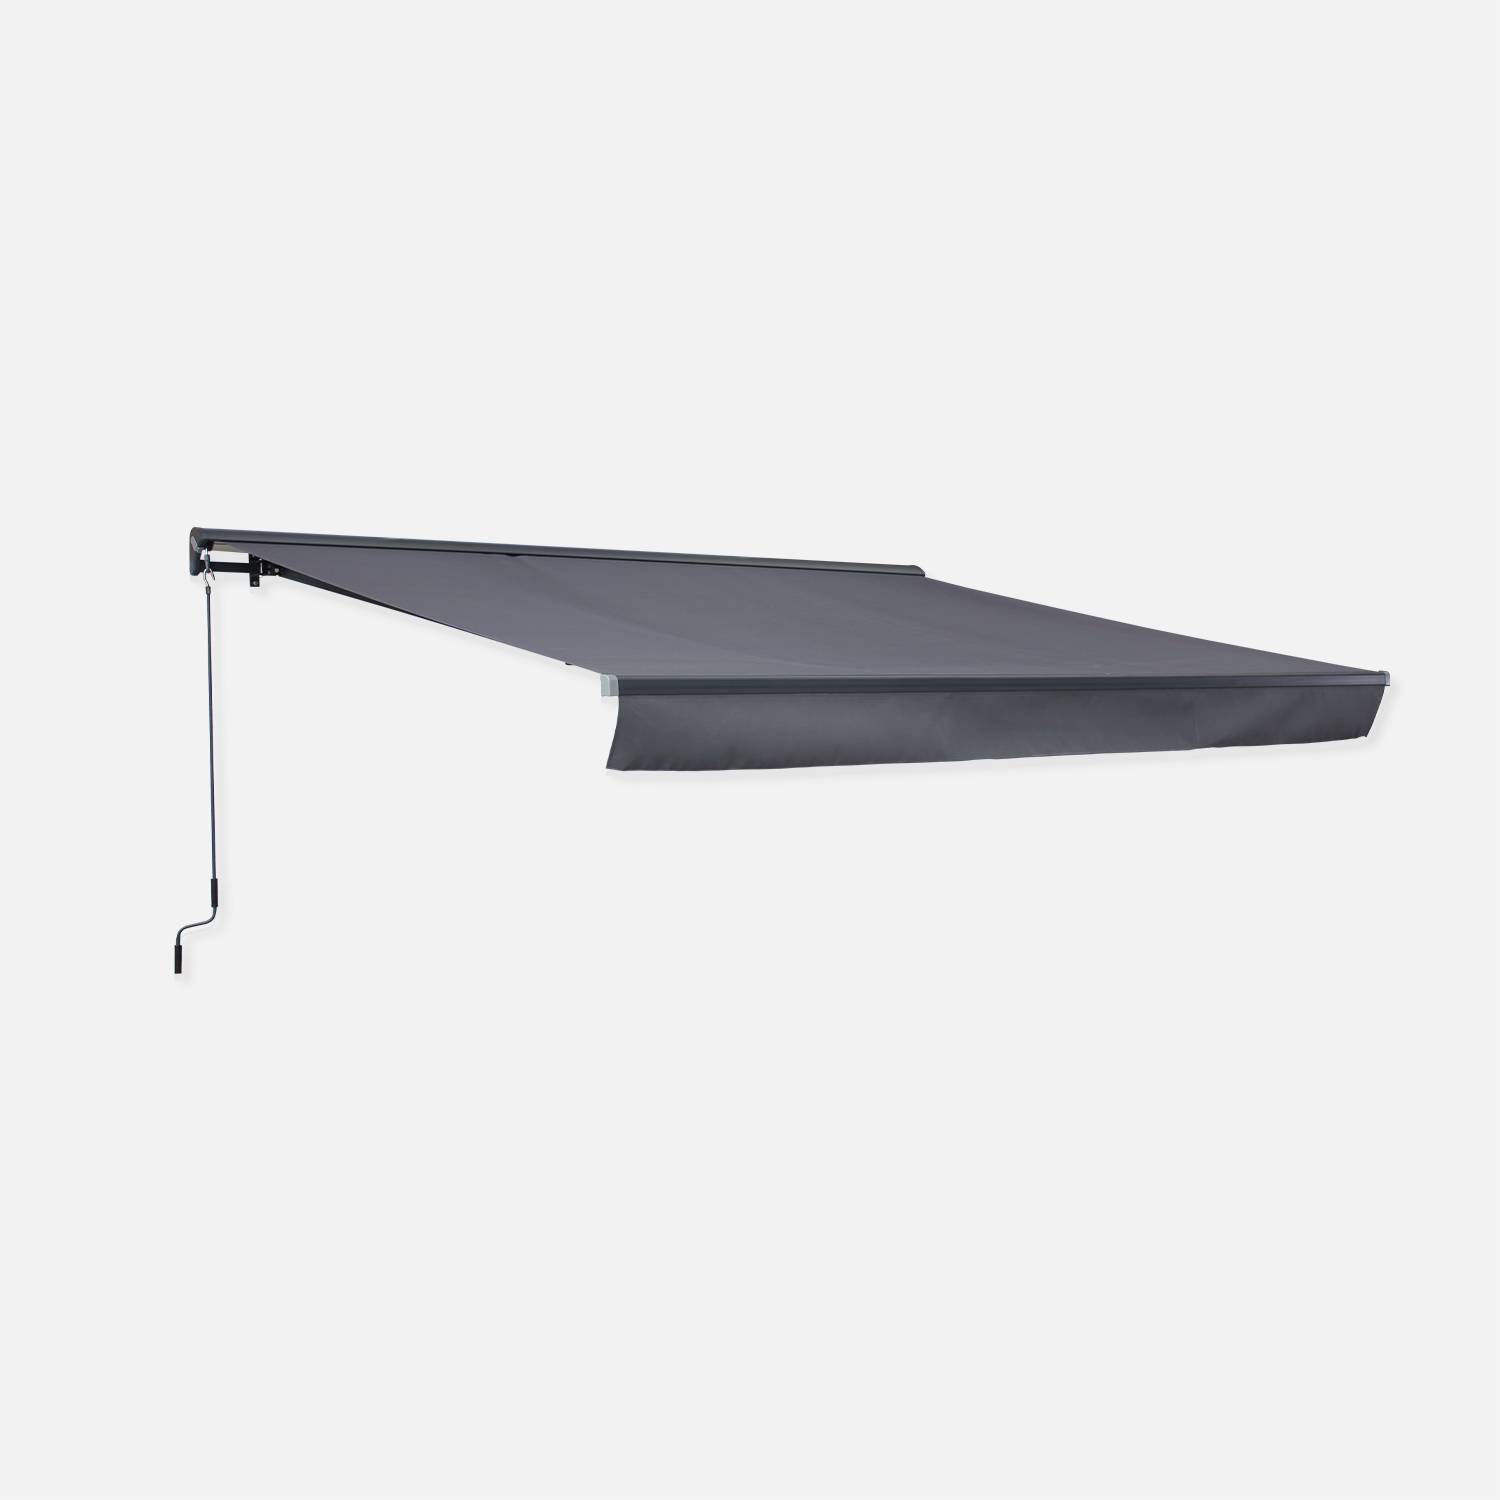 Retractable Half-cassette Patio awning - wall awning, aluminium semi-bloc, manual system, coated polyester fabric - Shado 4x3m - Grey Photo2